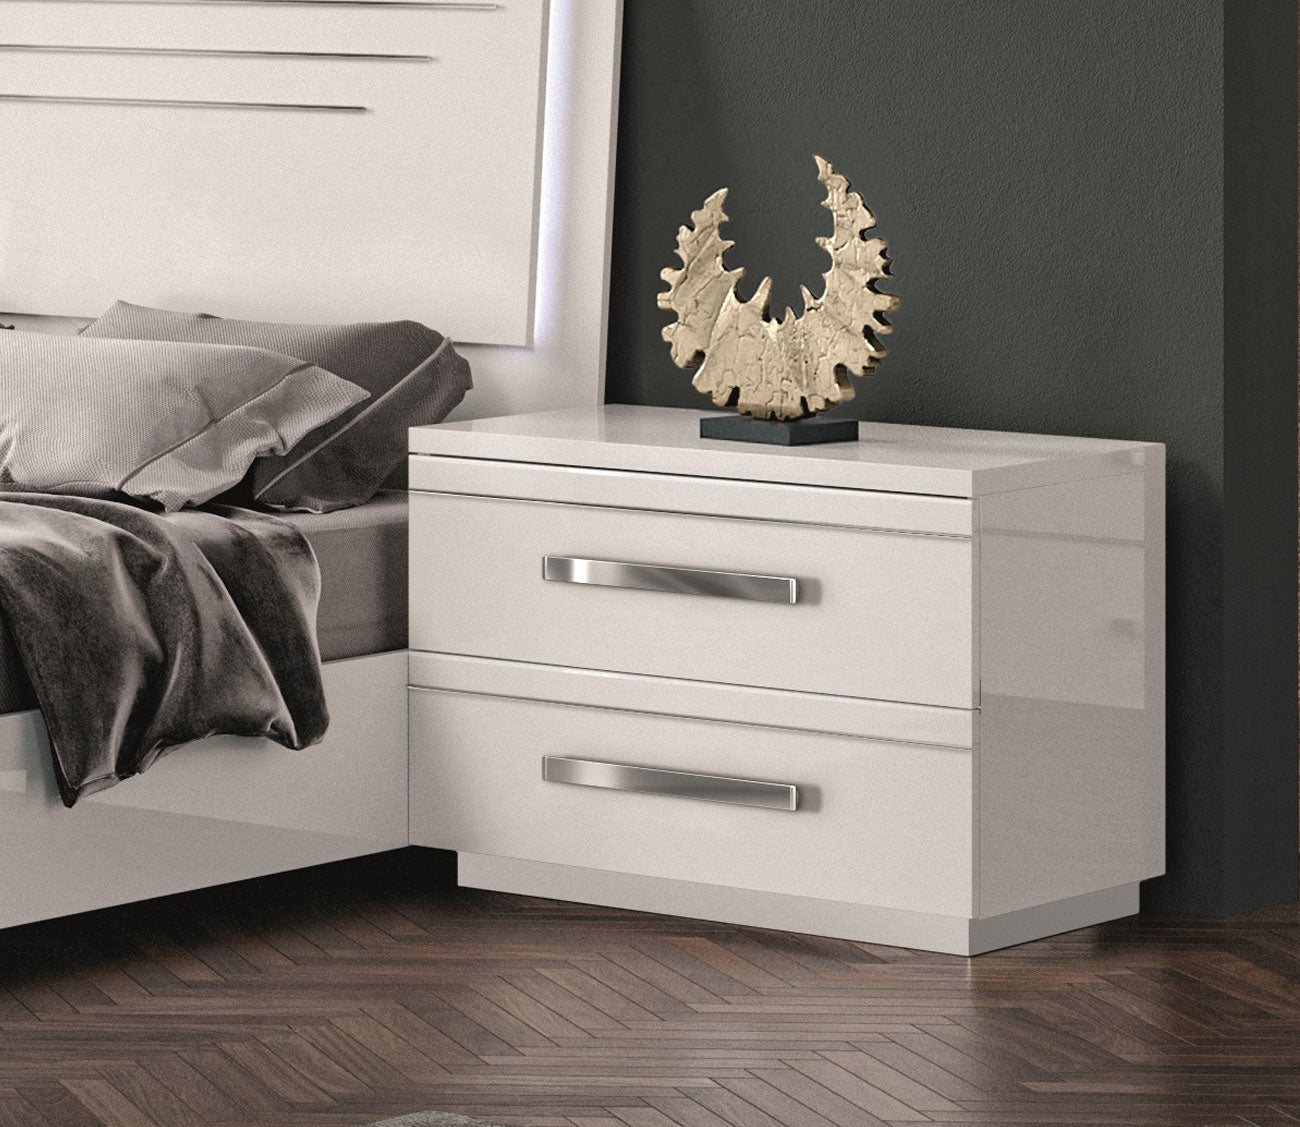 Palermo Palmi Lacquered 2-Drawer Nightstand by NCA Designs